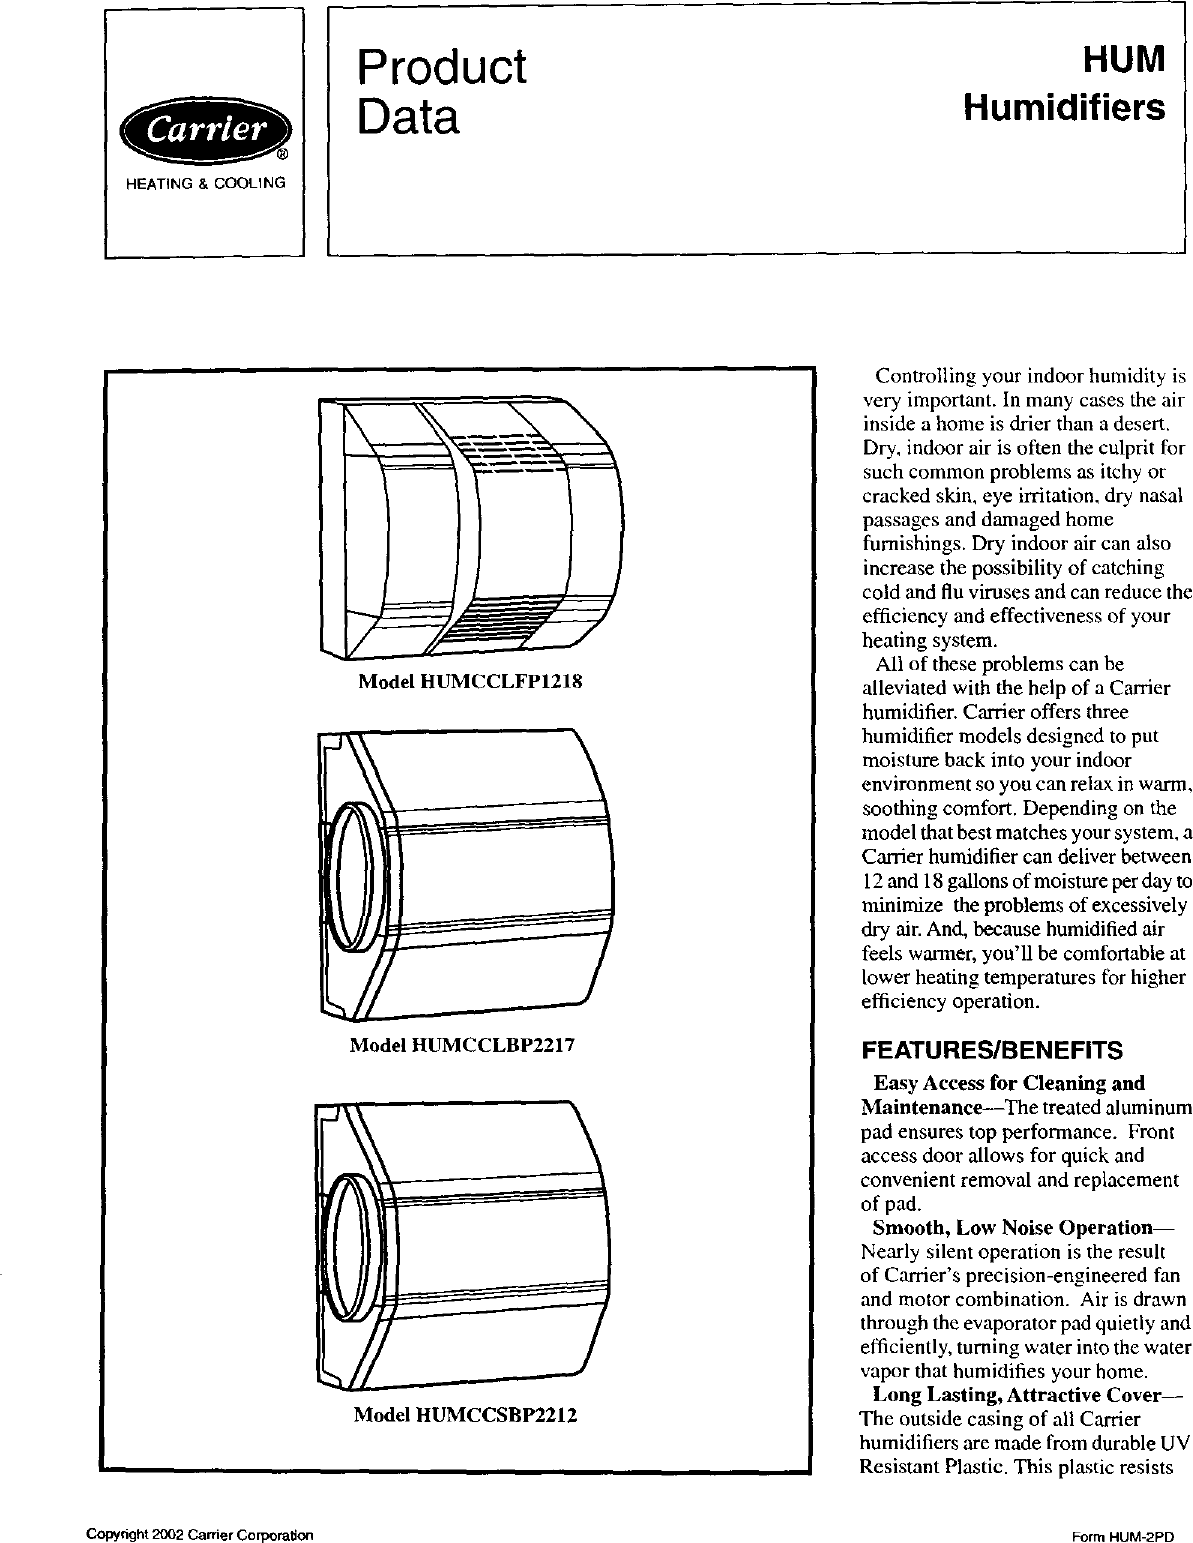 Page 1 of 8 - CARRIER  Humidifier Manual L0211036